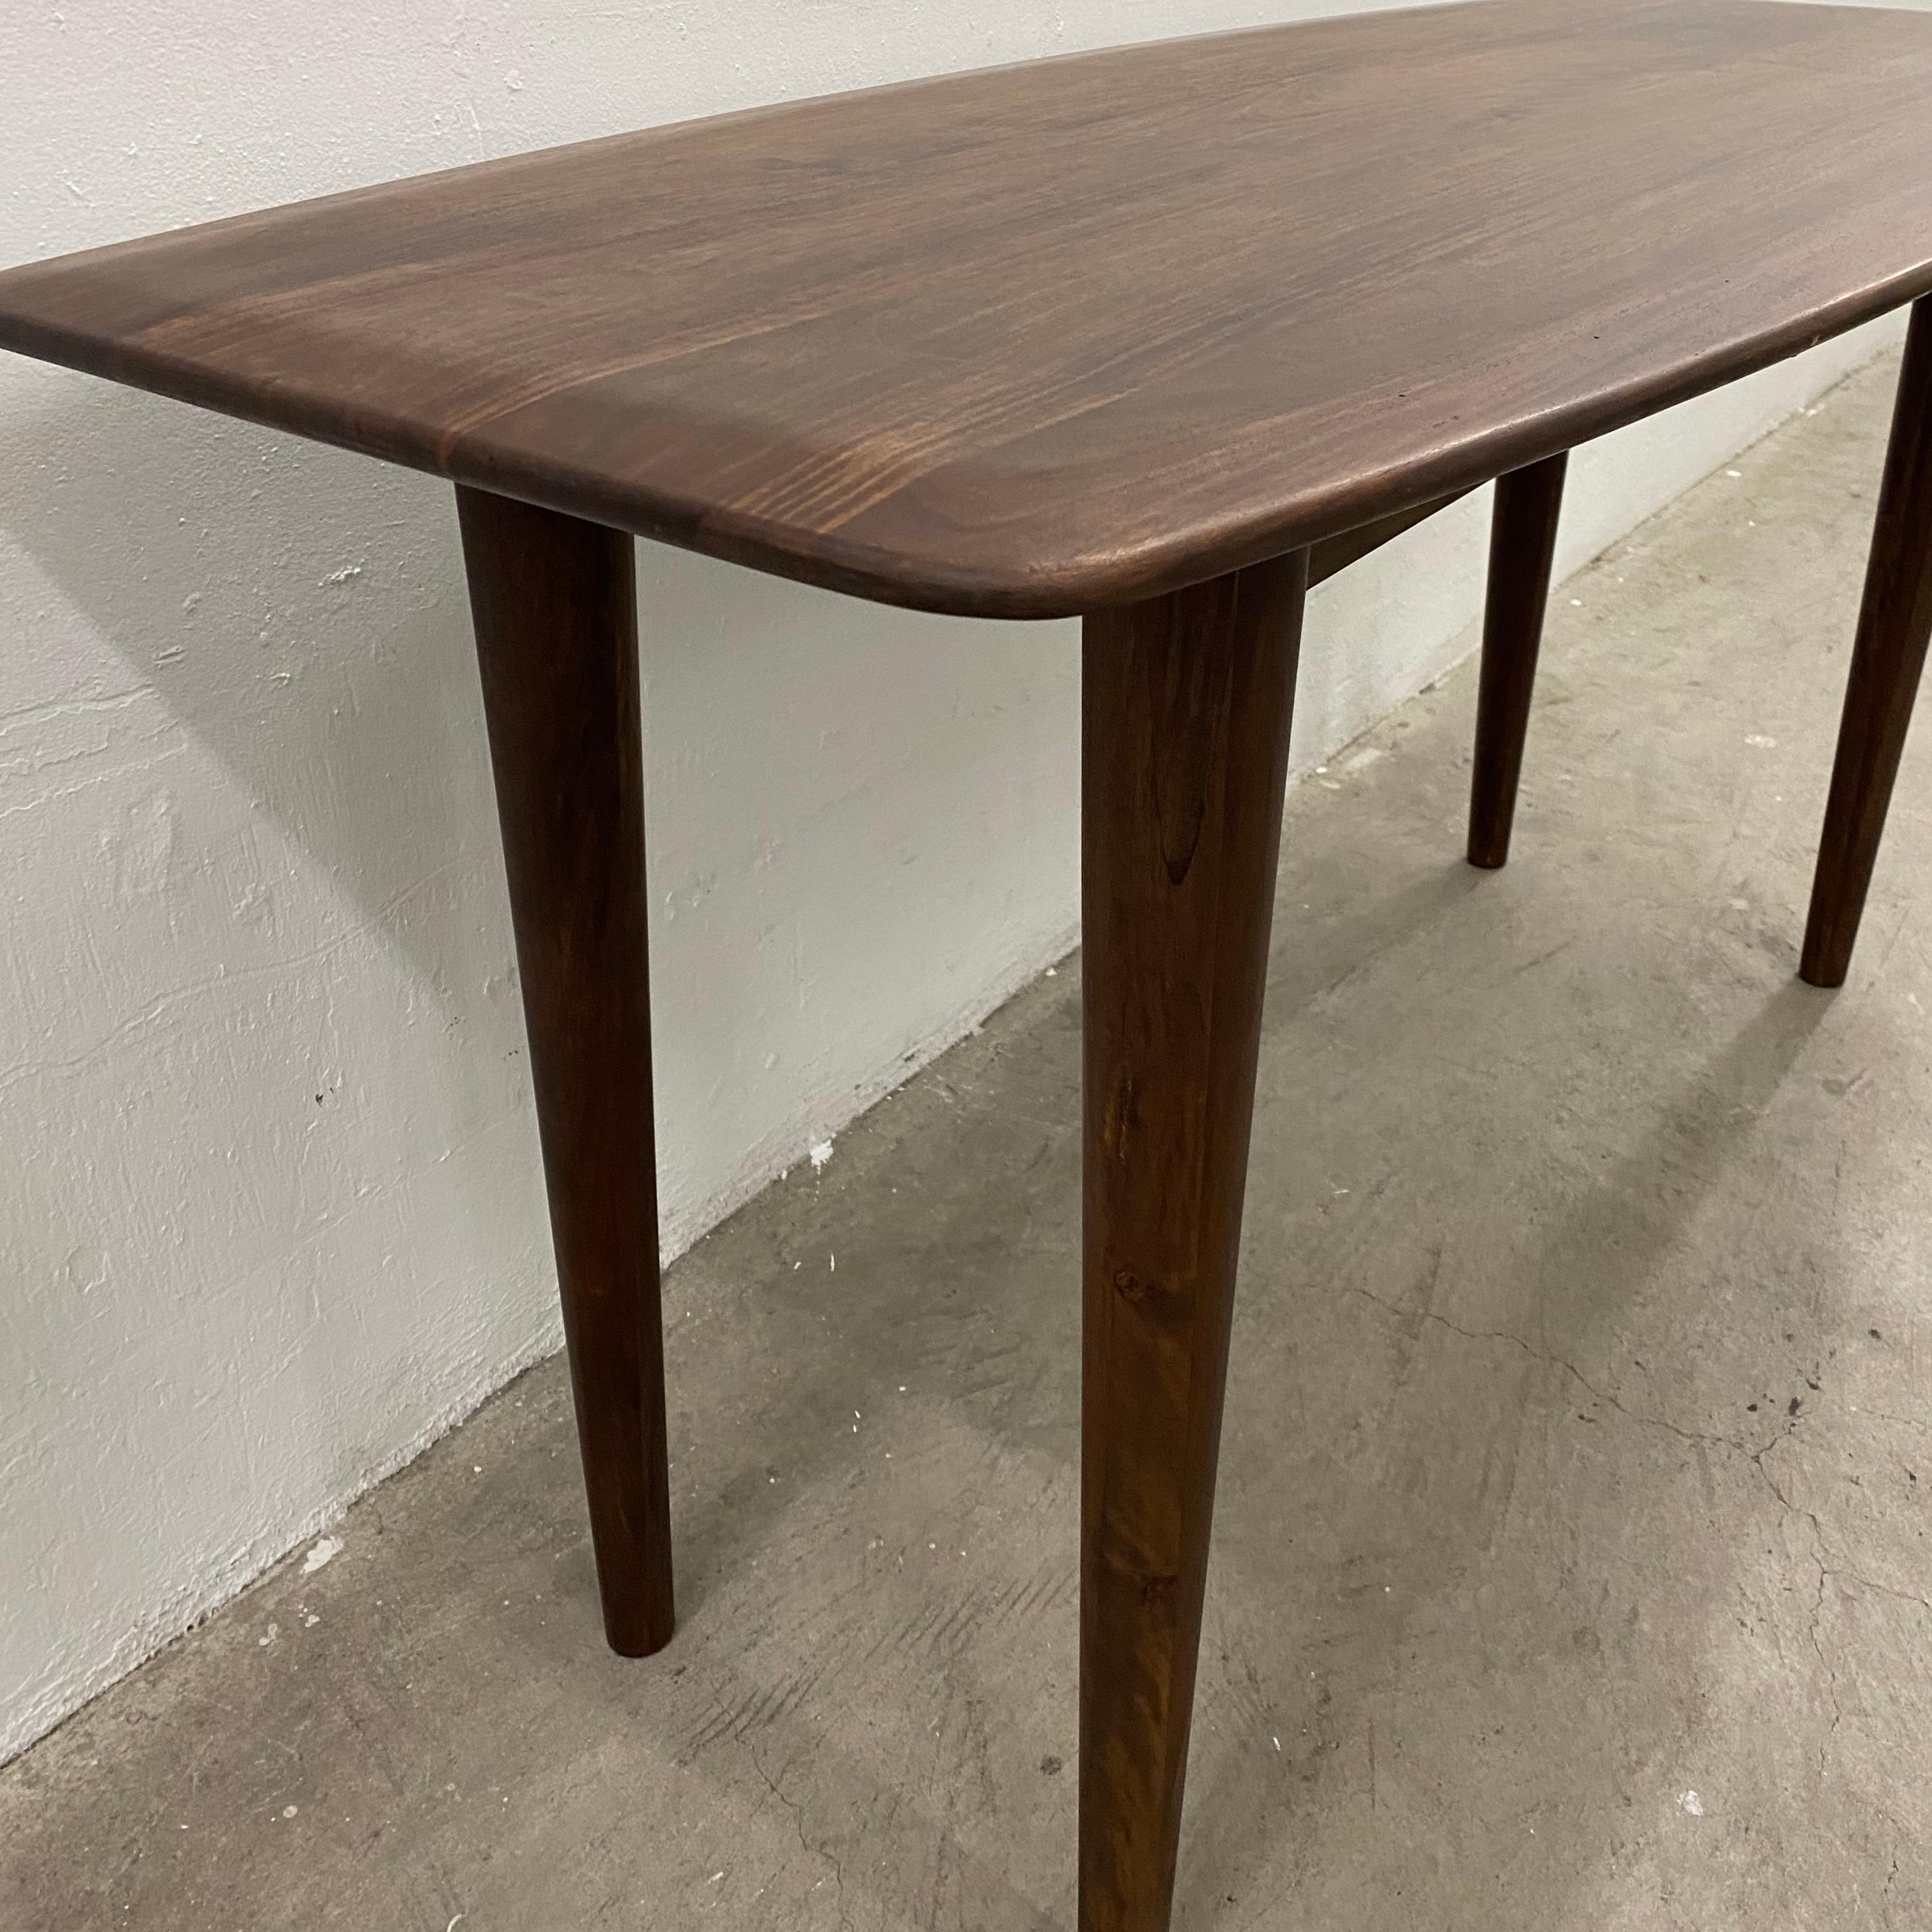 Hand-Crafted Contemporary Walnut Table for Console, Dining, or Desk